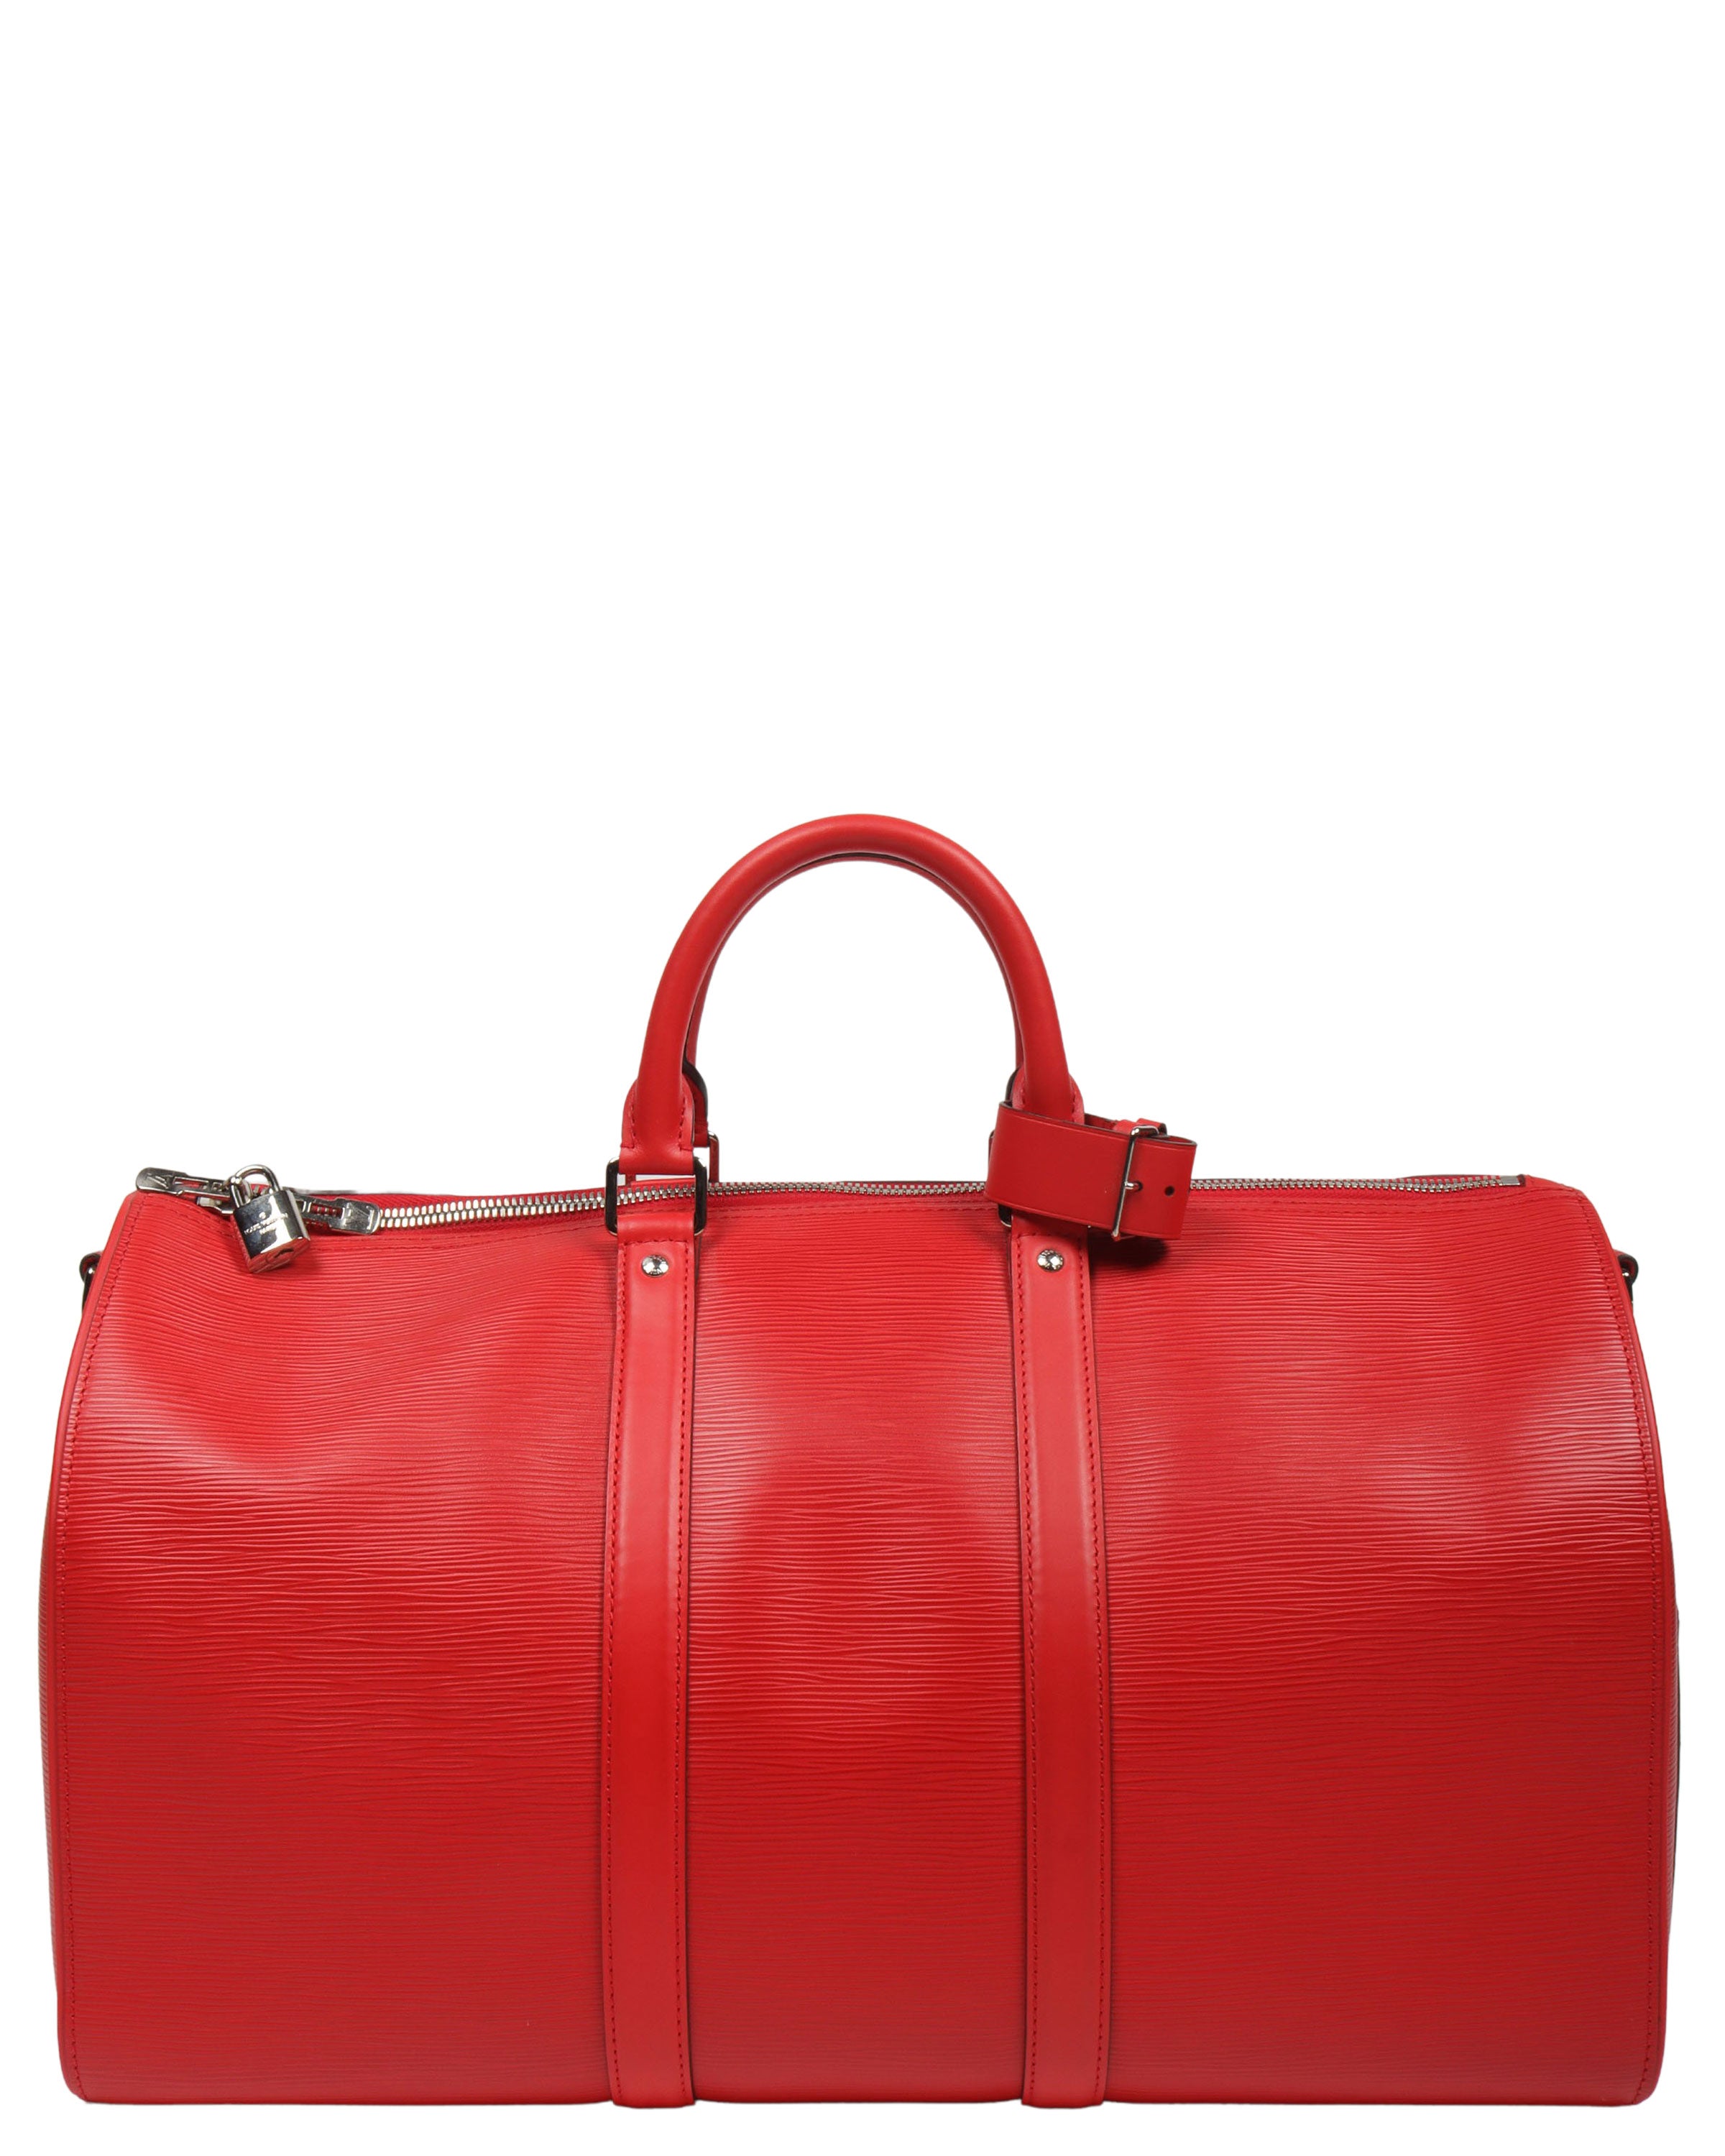 Louis Vuitton Keepall Bandouliere 45 Supreme Red Epi Leather